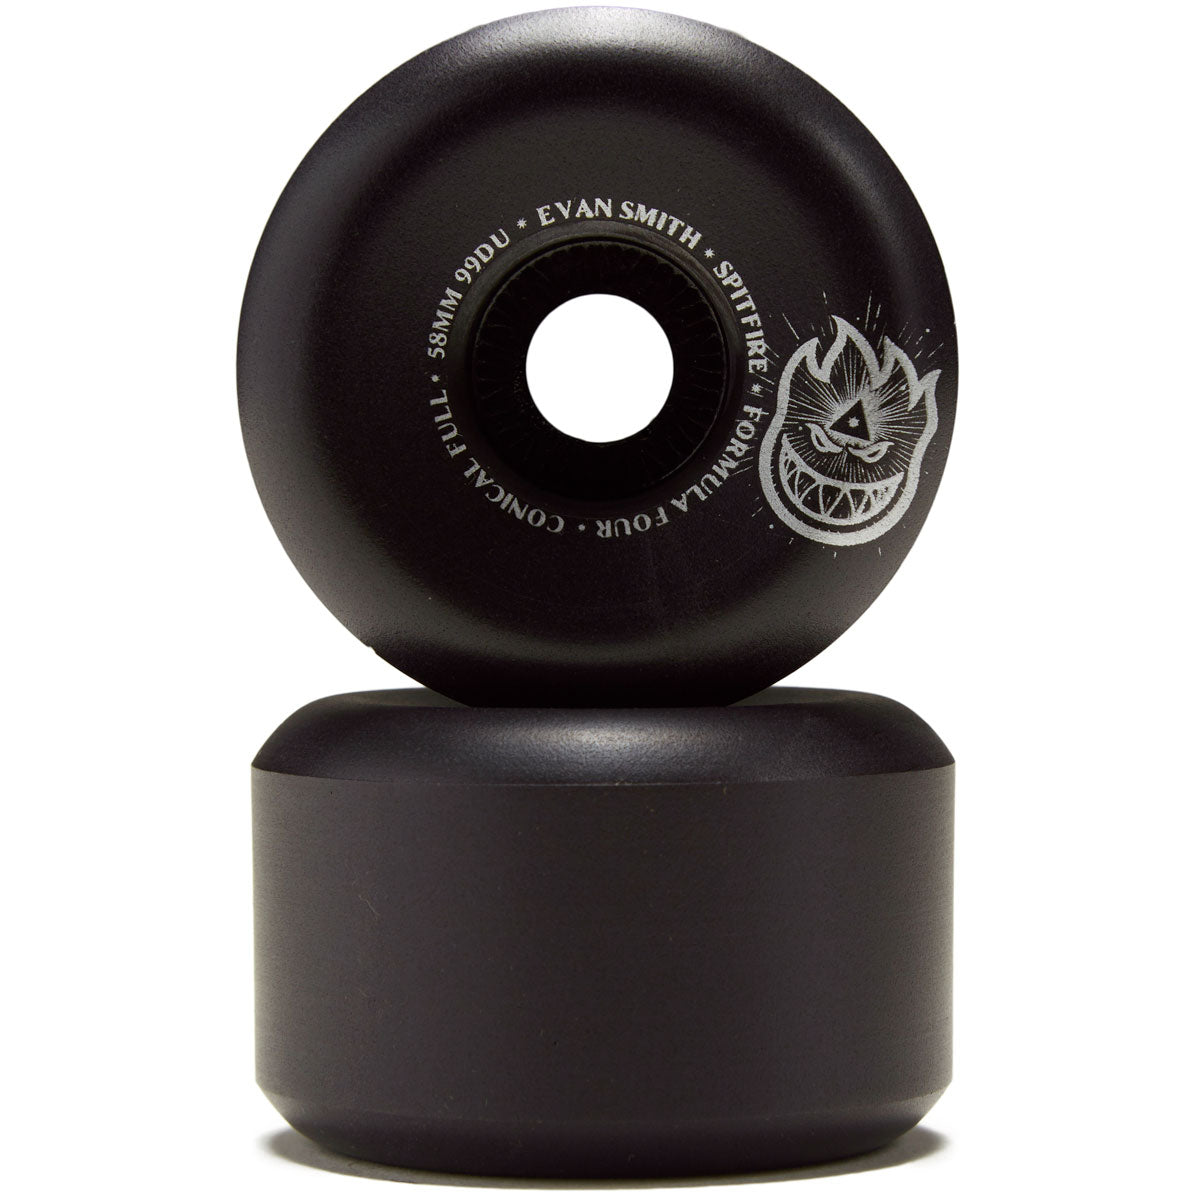 SPITFIRE WHEELS FORMULA FOUR EVAN SMITH VISIONS CONICAL FULL BLACK 99A  (58MM)